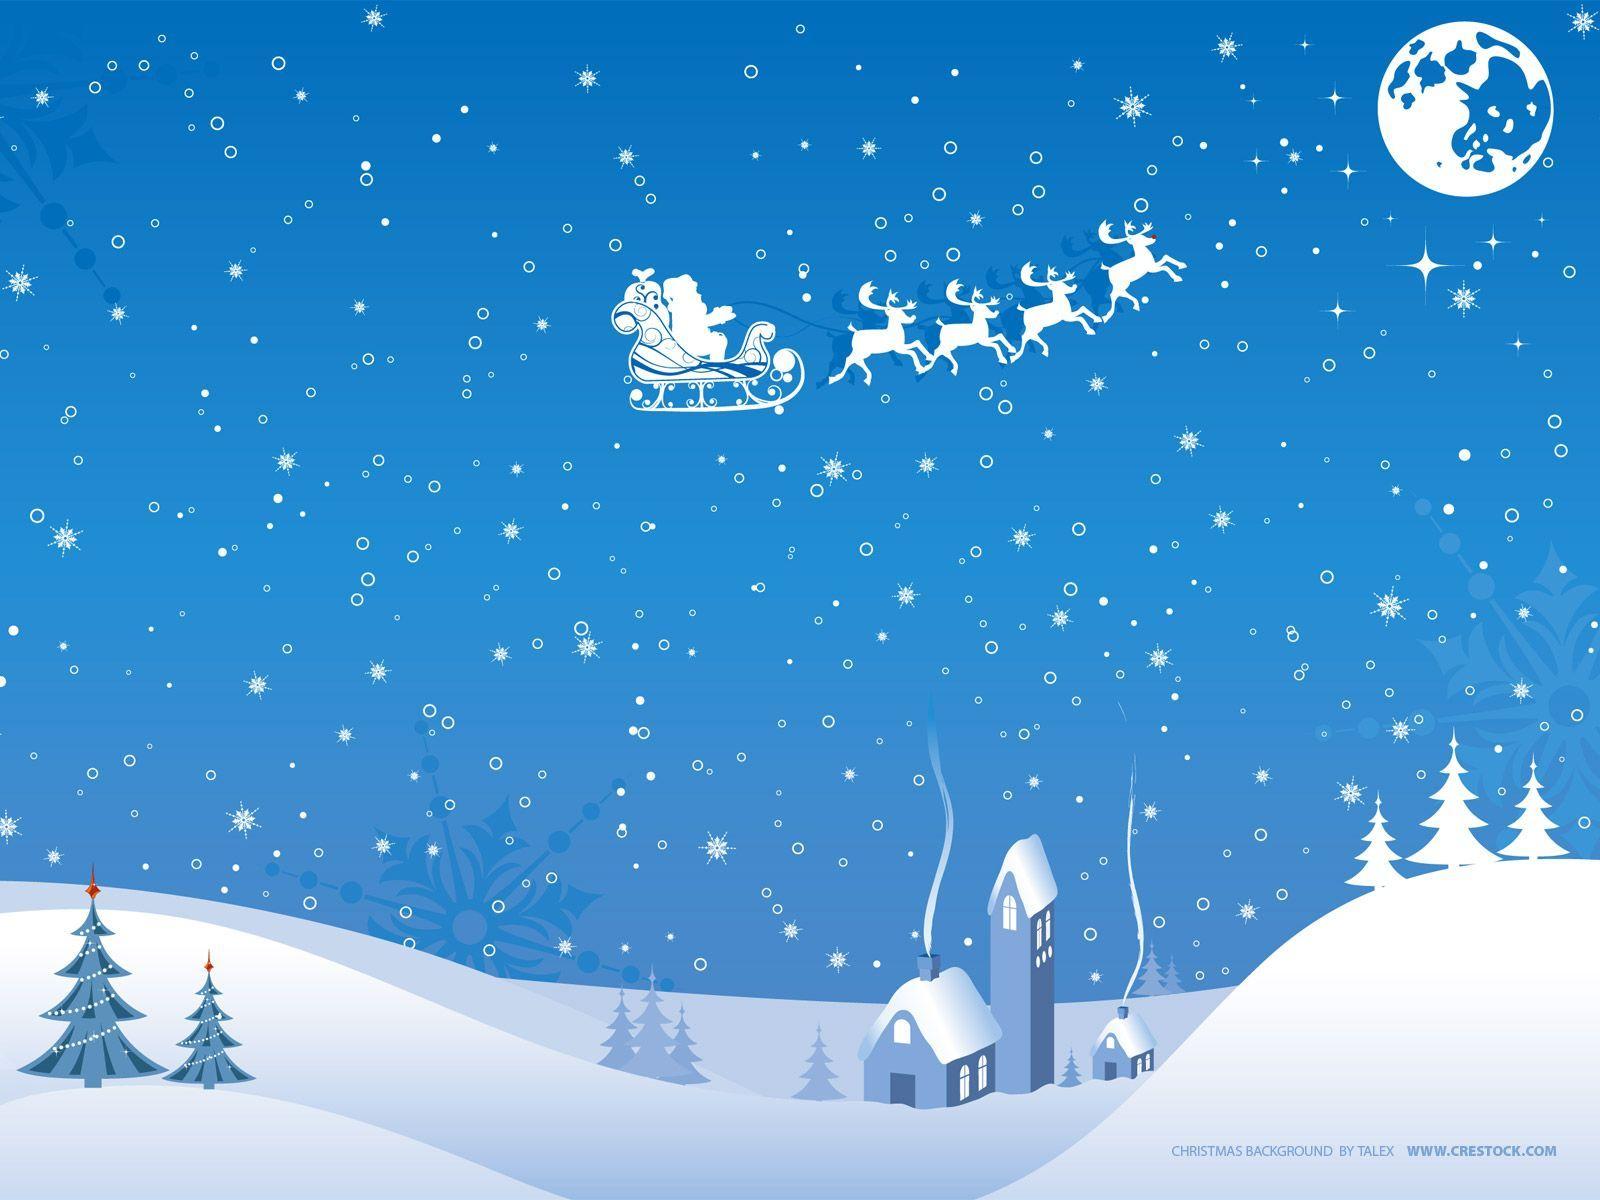 Beautiful Christmas and Winter Wallpaper For Your Desktop